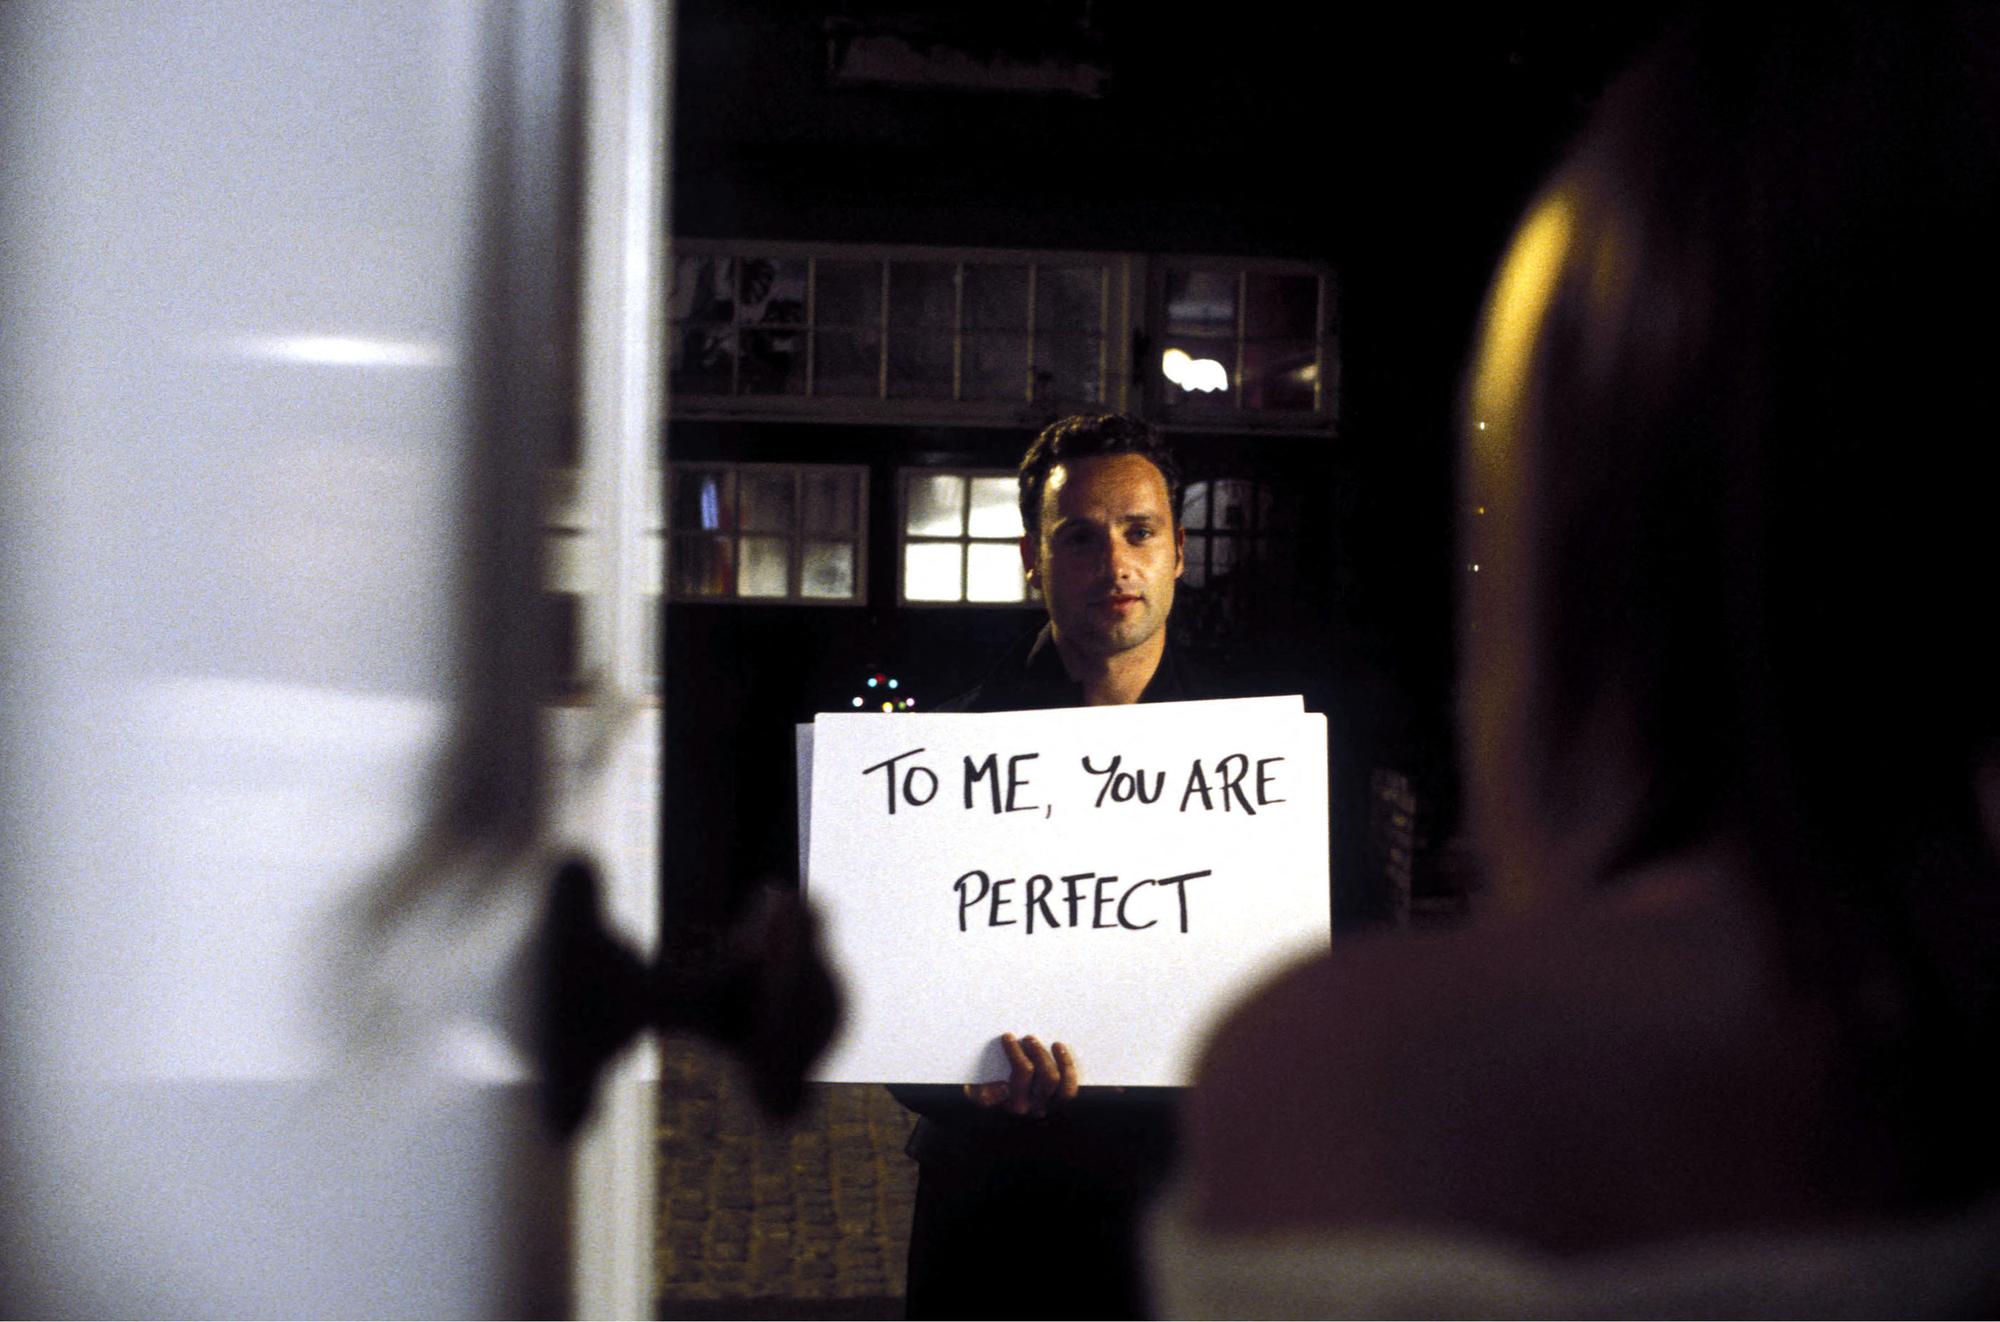 Andrew Lincoln face à Keira Knightley dans "Love Actually" en 2003. [AFP - Working Title Films / DNA Film]